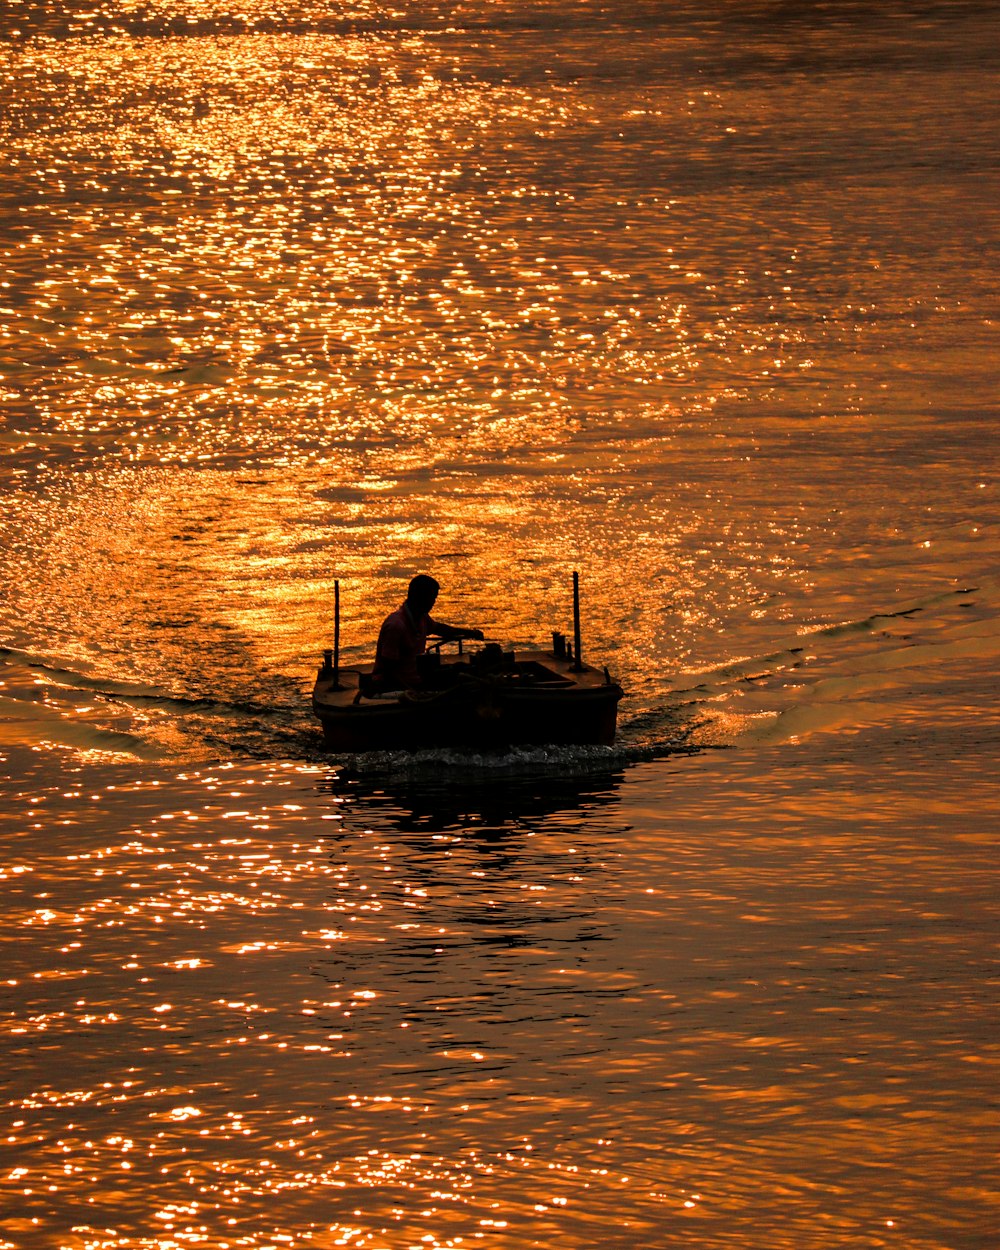 silhouette of 2 people riding on boat on body of water during sunset